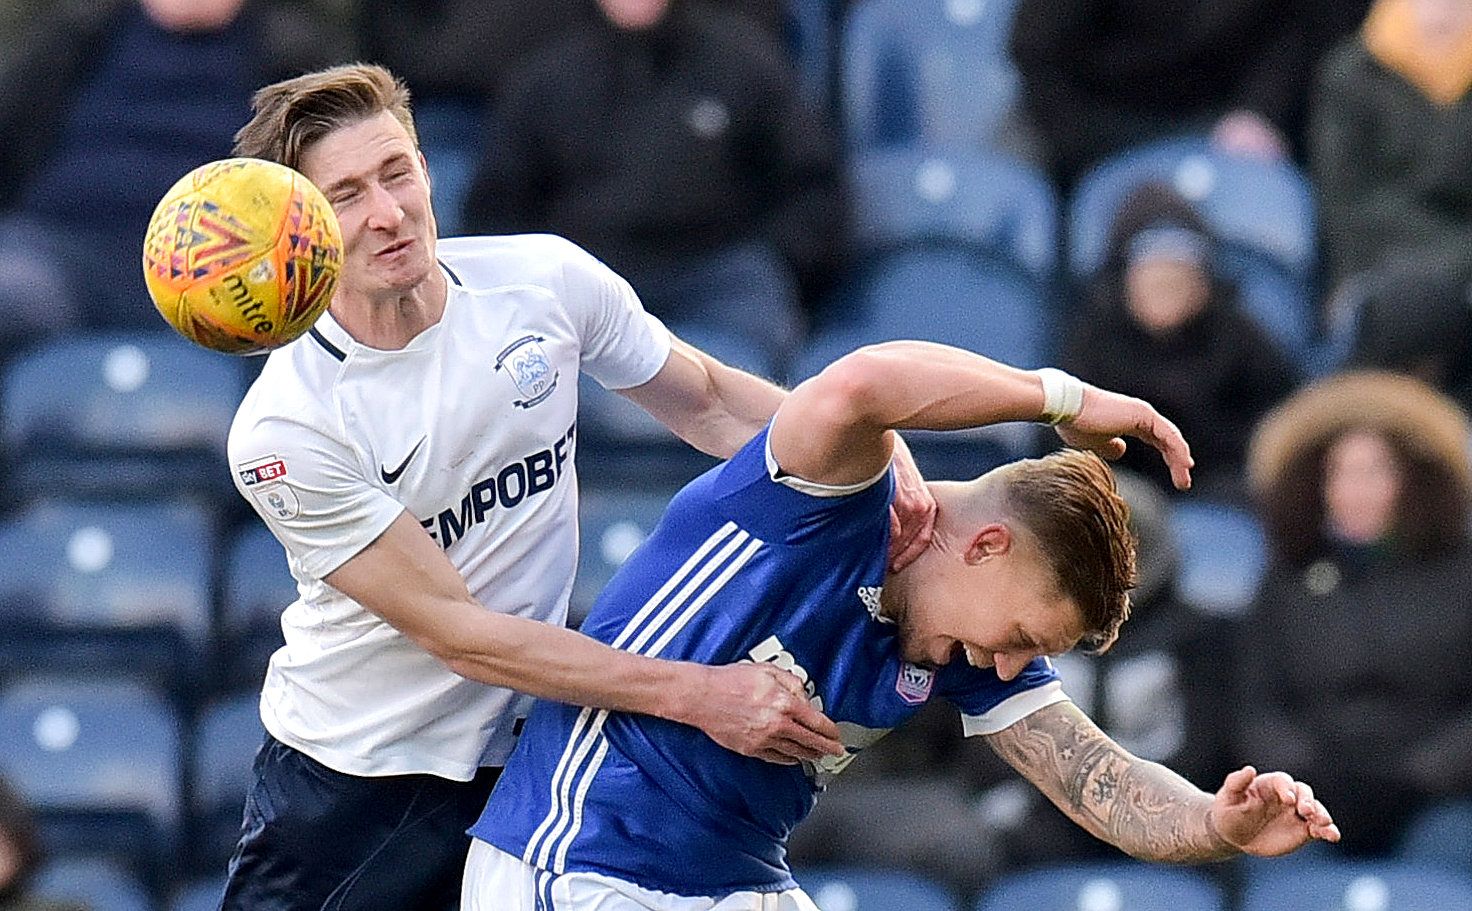 Soccer Football - Championship - Preston North End vs Ipswich Town - Deepdale, Preston, Britain - February 24, 2018   Preston's Ben Davies in action with Ipswich Town's Martyn Waghorn   Action Images/Paul Burrows    EDITORIAL USE ONLY. No use with unauthorized audio, video, data, fixture lists, club/league logos or 